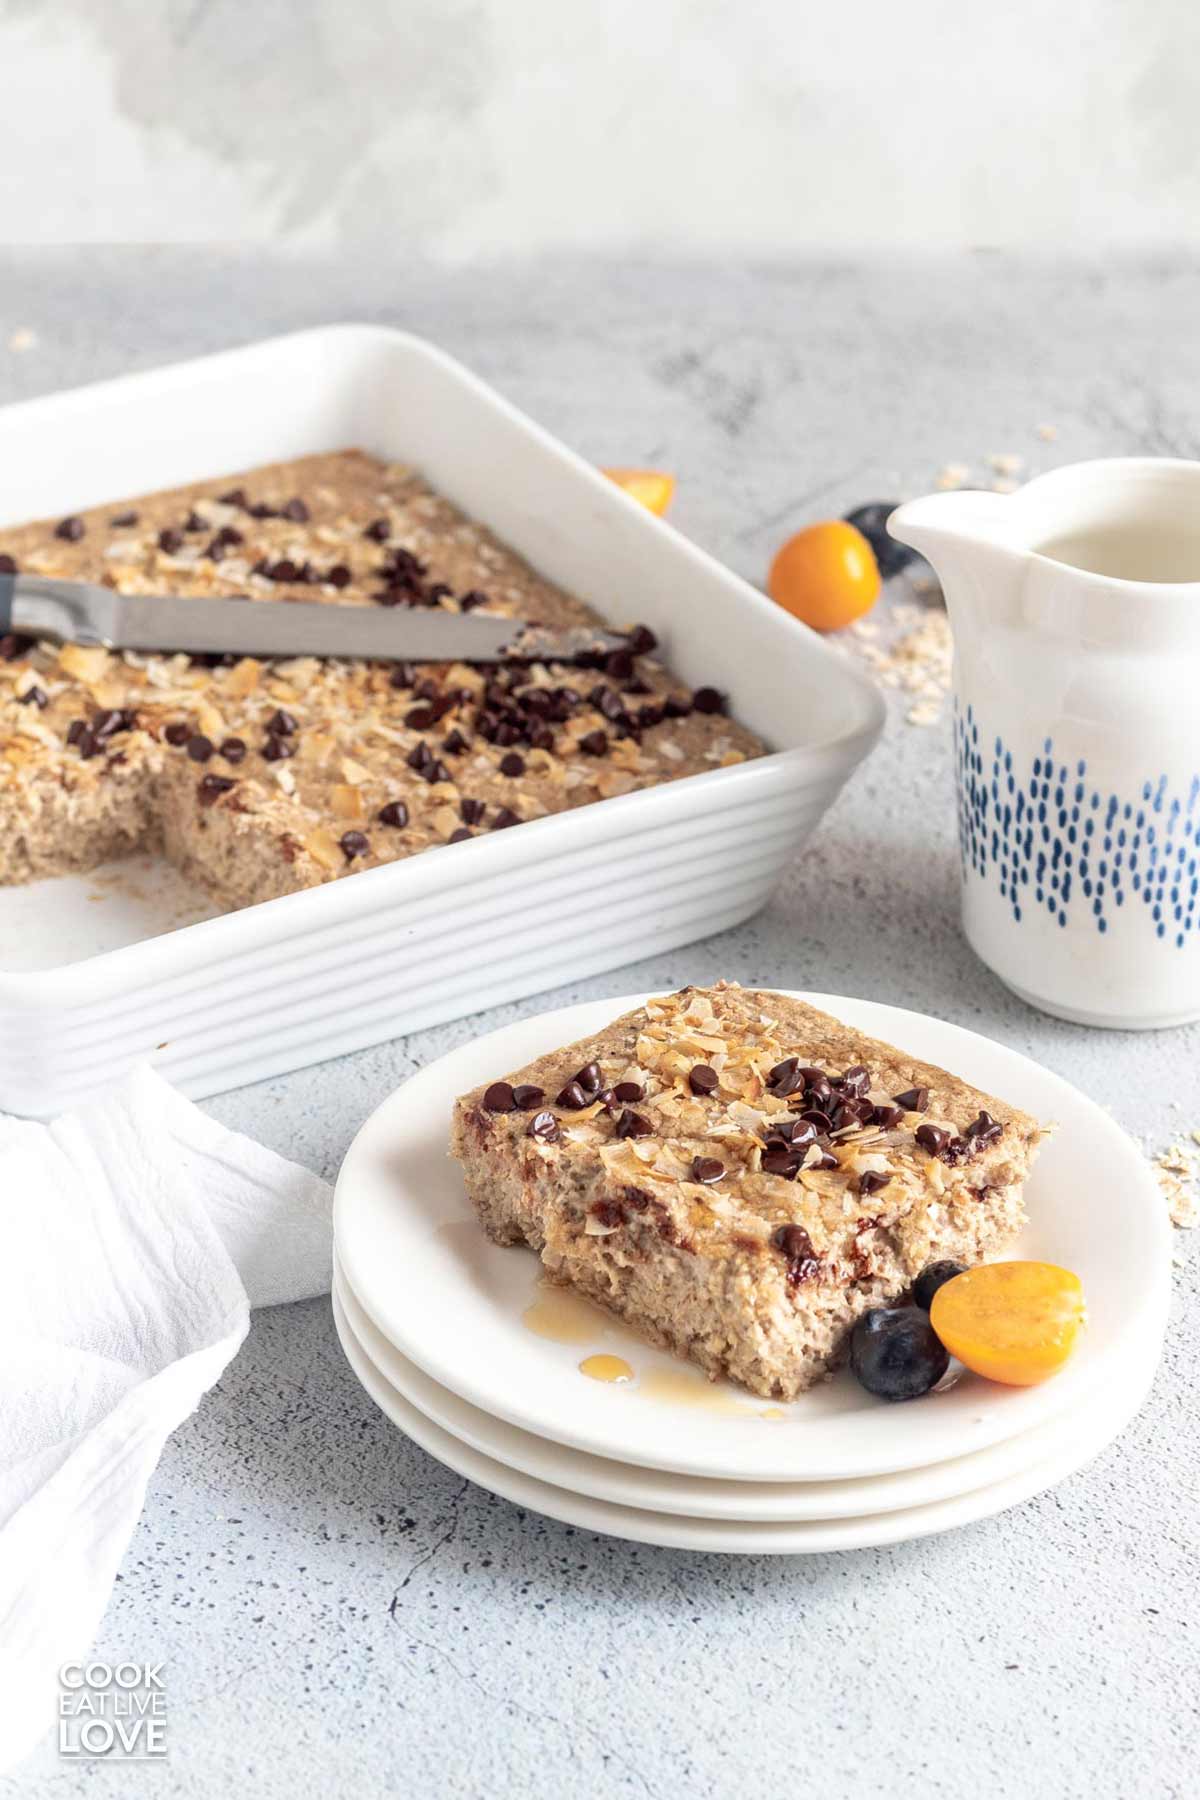 Baked oatmeal without bananas on a plate with fruit and a casserole dish in the background.